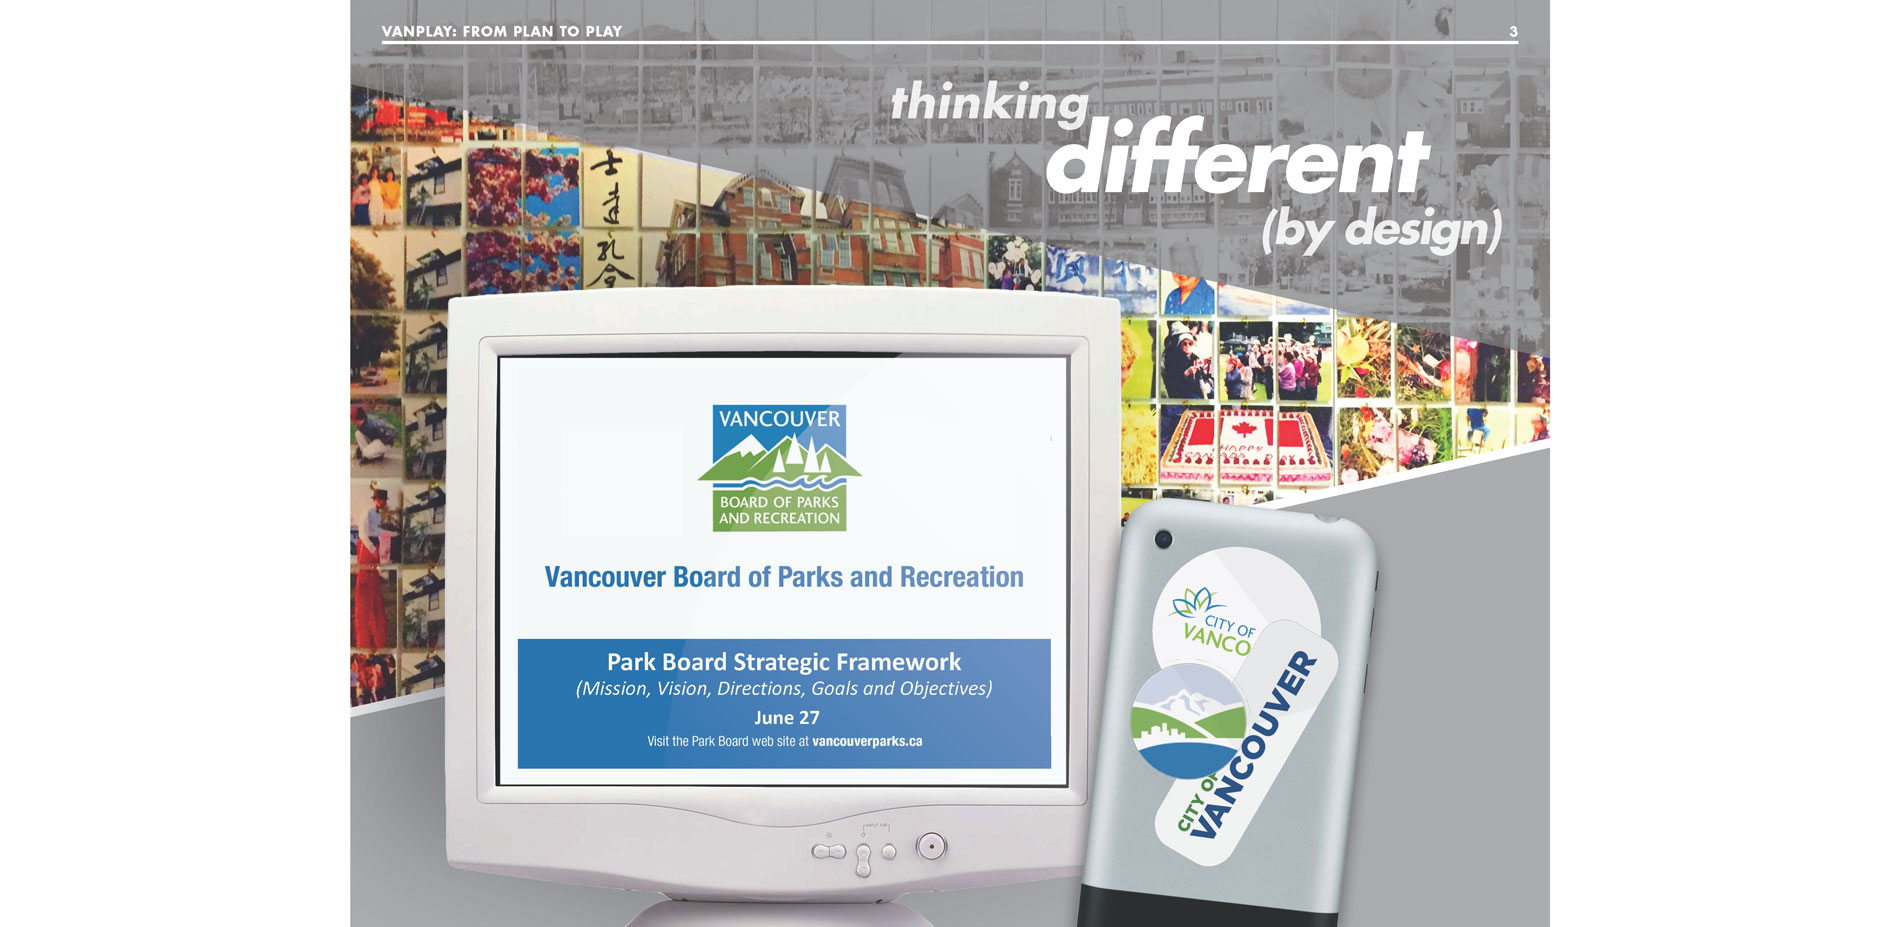 The Vancouver Board of Parks and Recreation challenged the design team to think beyond traditional parks and recreation brands and develop an identity that spoke to the …